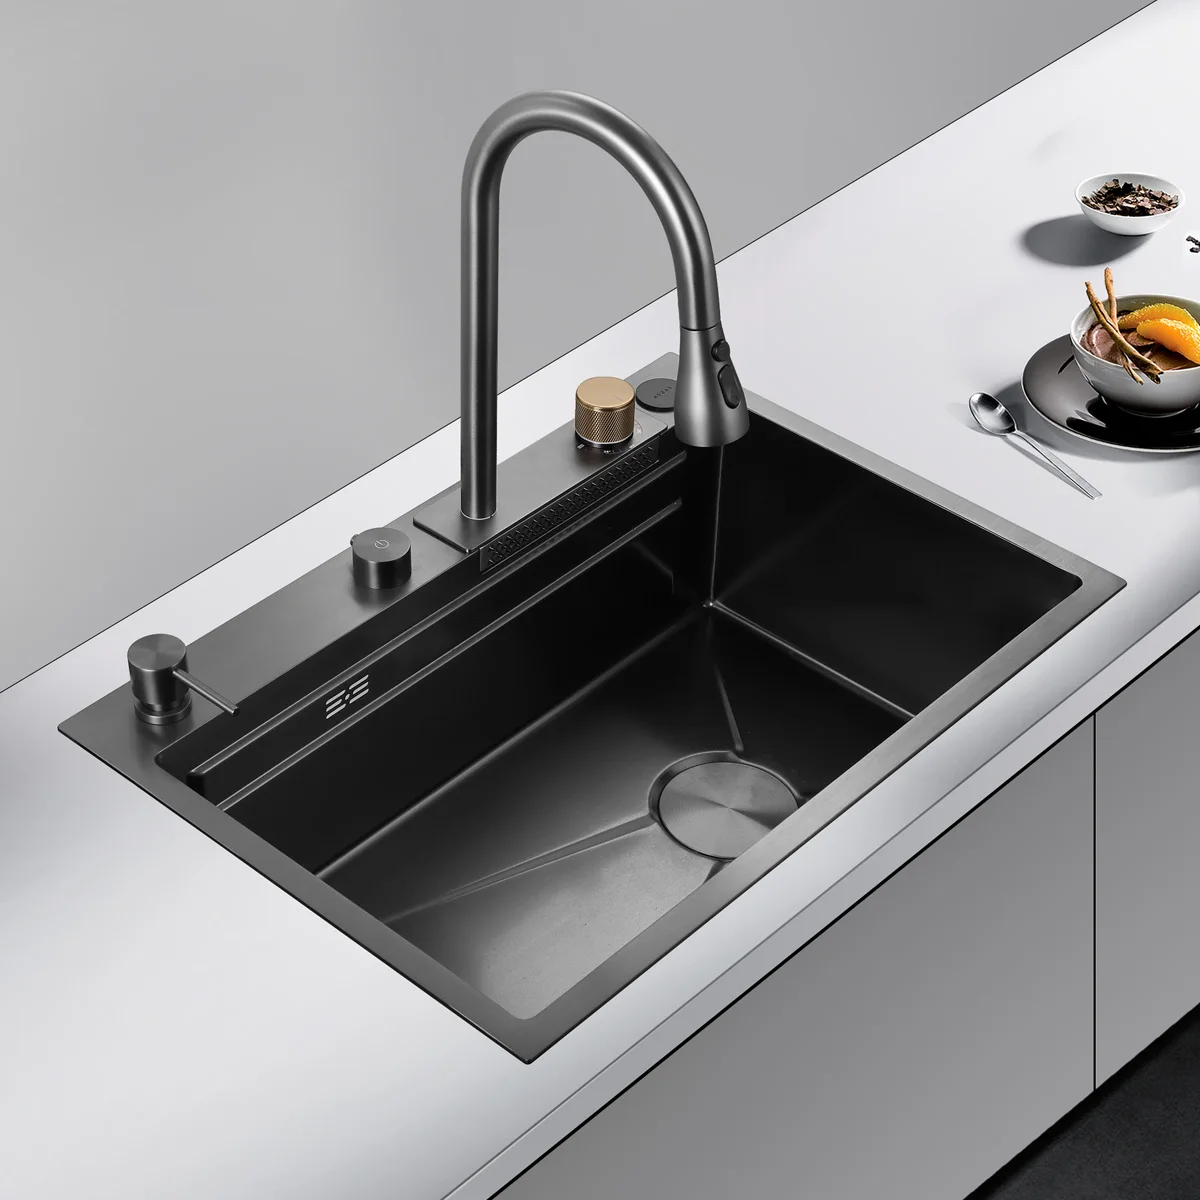 Asras New Model 6847FY ss304 Stainless Steel Single Basin Nano Black Rainfall Handmade Kitchen Sink with Rainfall Faucet